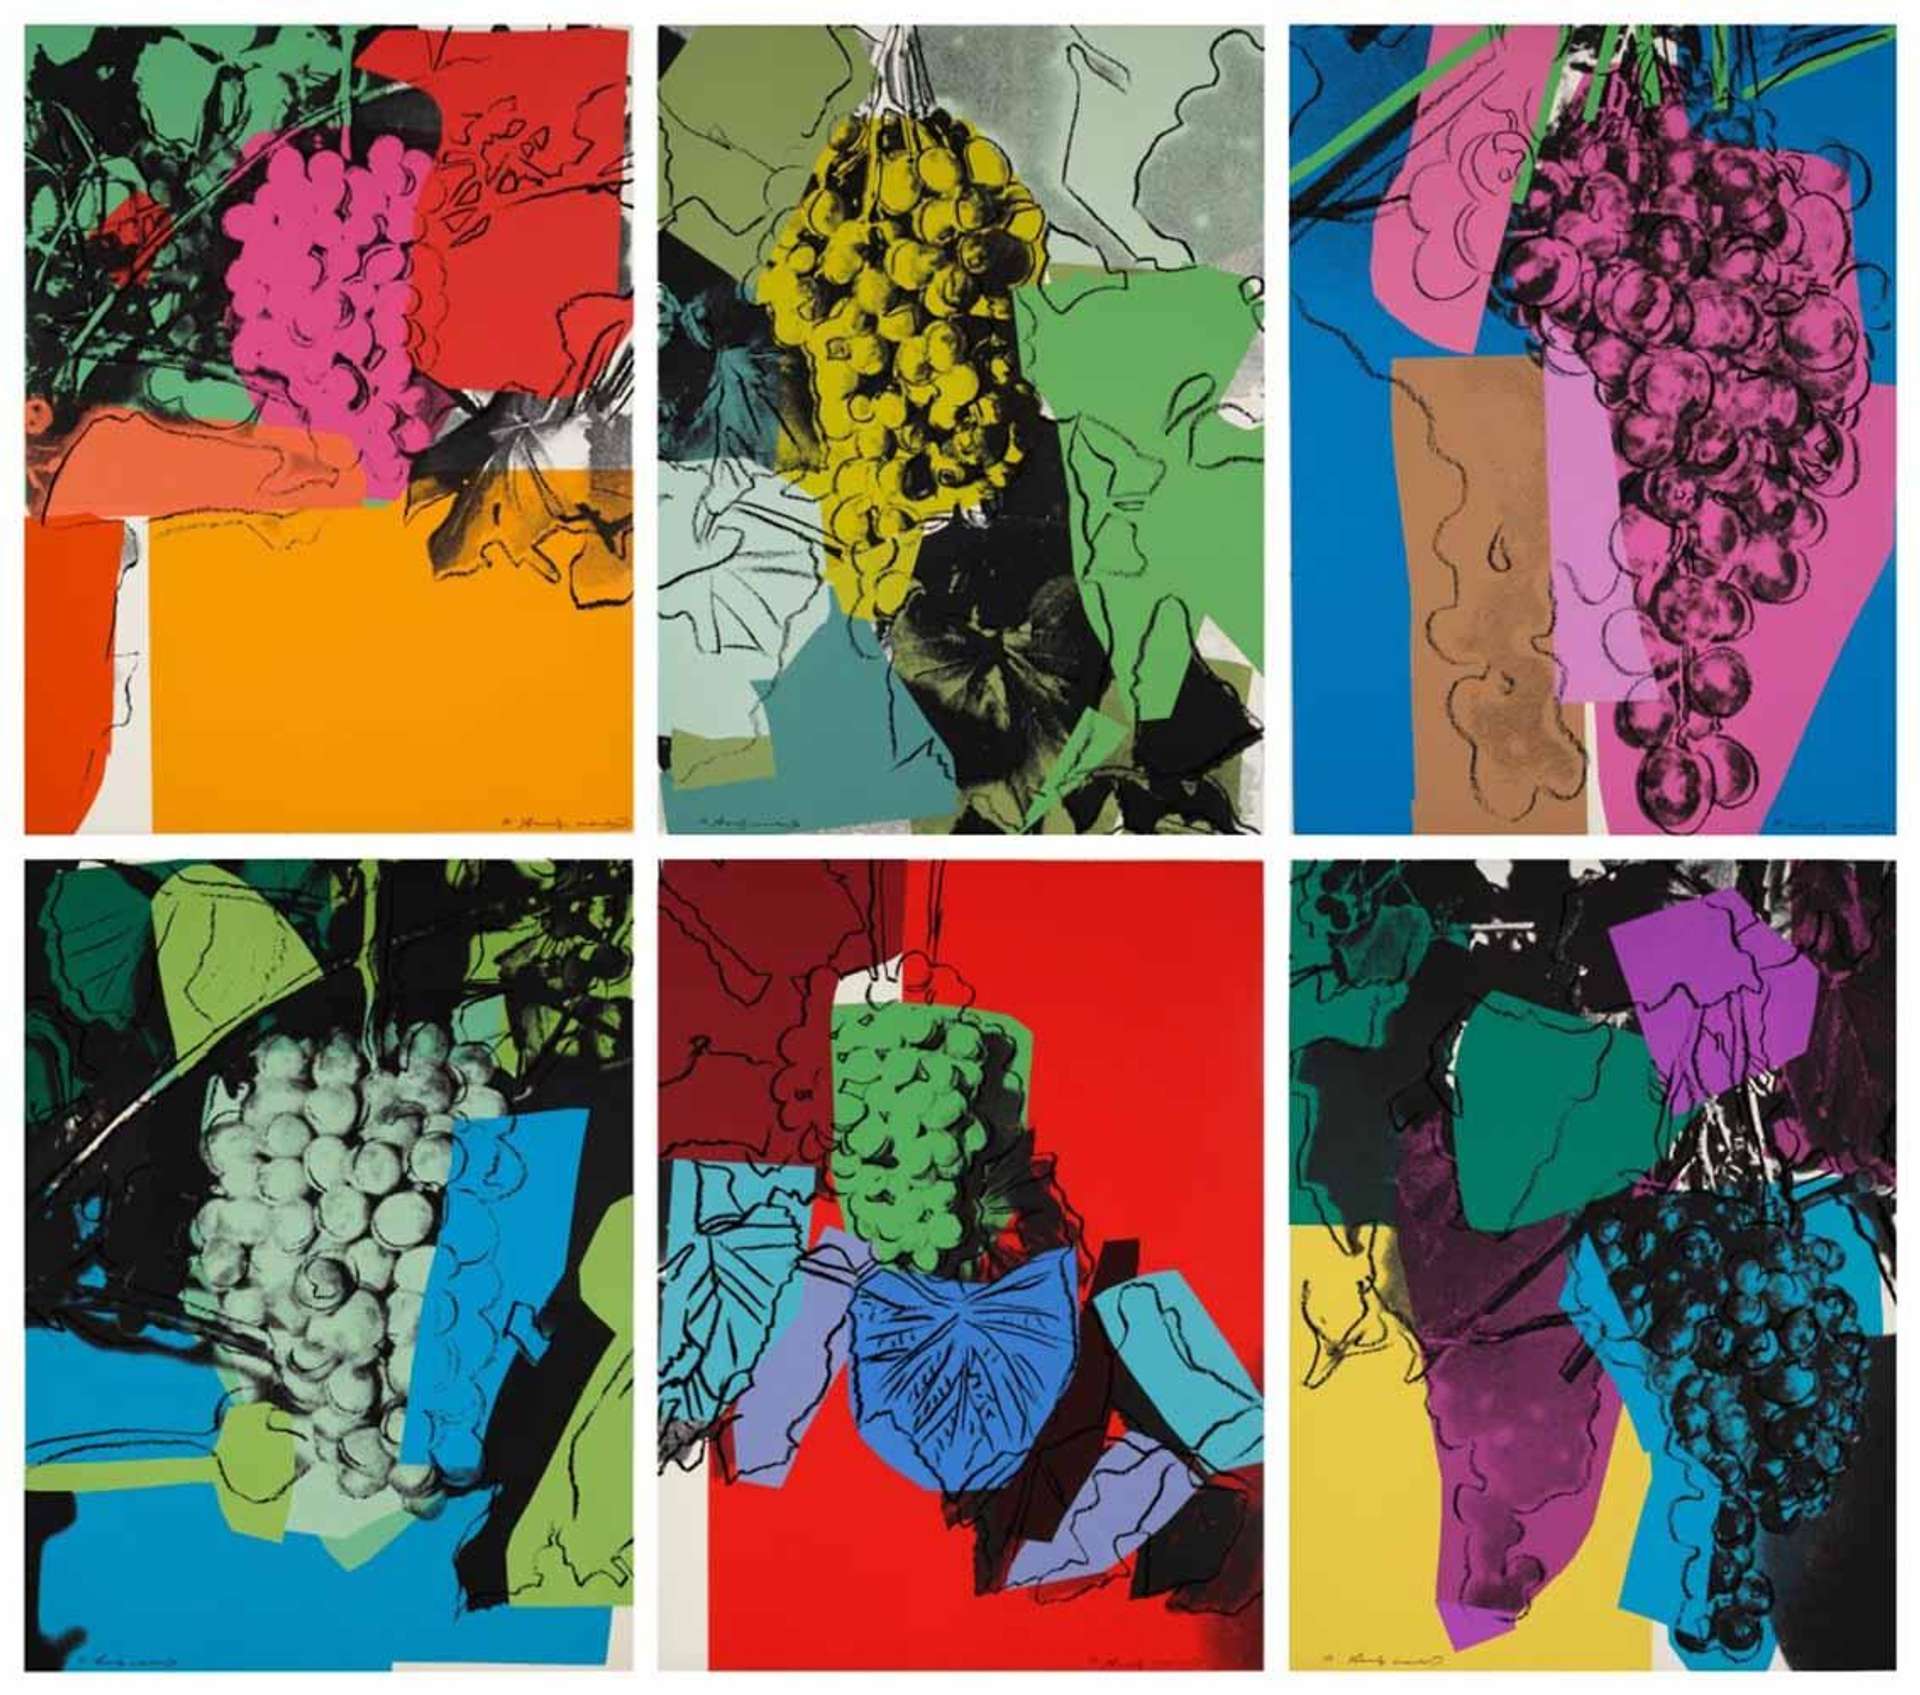 Grapes (complete set) - Signed Print by Andy Warhol 1979 - MyArtBroker